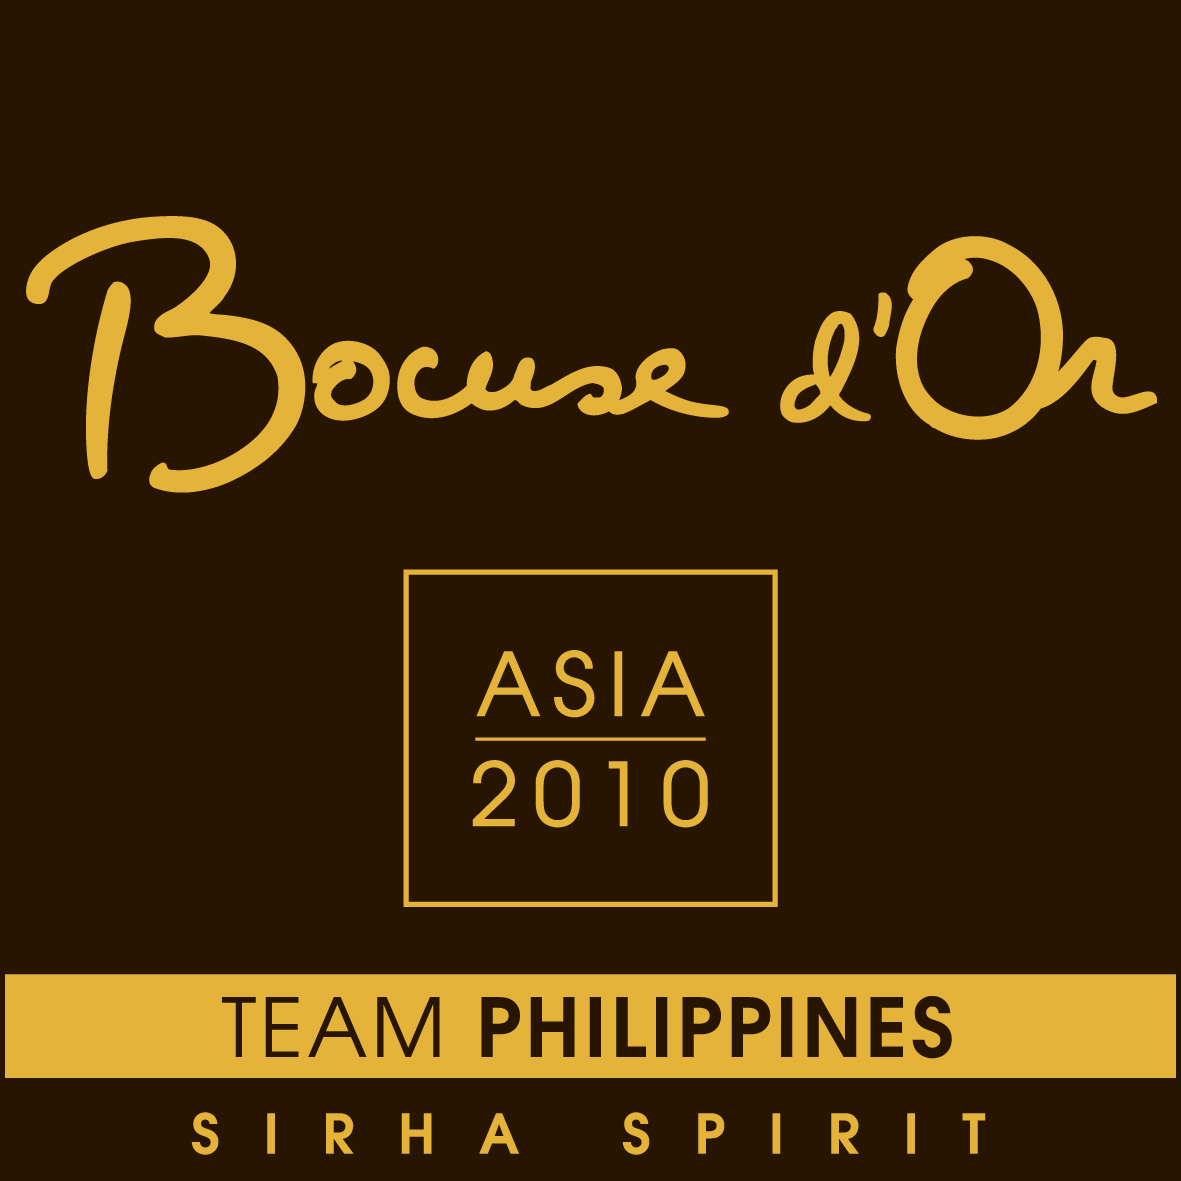 LTB Phils. Culinary Team fields team for Bocuse d'Or Asia Selection - Shanghai